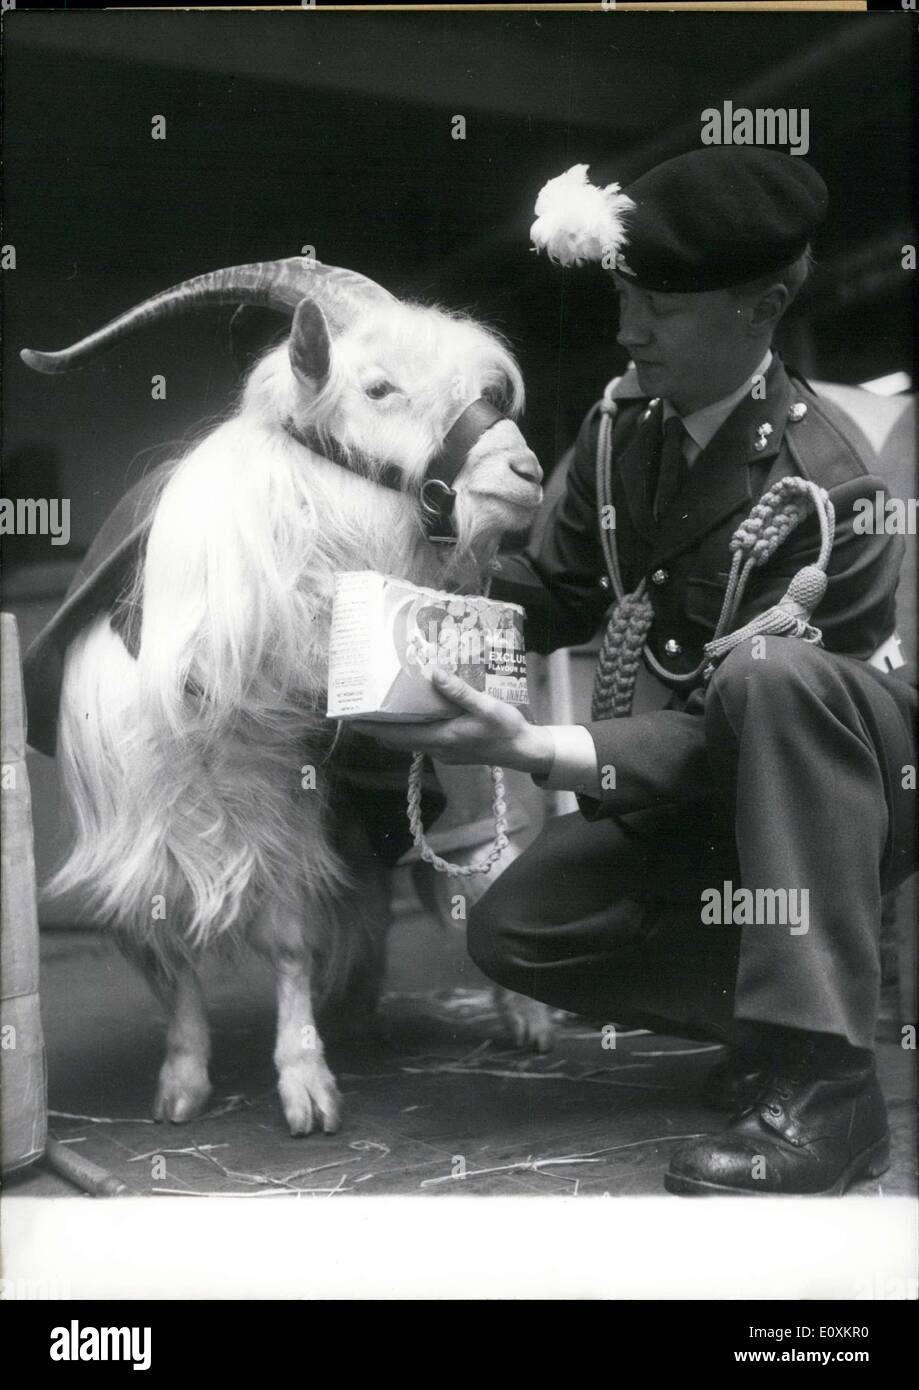 Mar. 08, 1967 - The most prominent ''guest soldier'' of the British Rhein Army is Billy, the goat mascot of the Royal Welsh Fusiliers. He is on his way back to Windsor. Fusilier John Thorpe is Billy's escort back home. Billy gets a special cabin on the flight back to London. Stock Photo